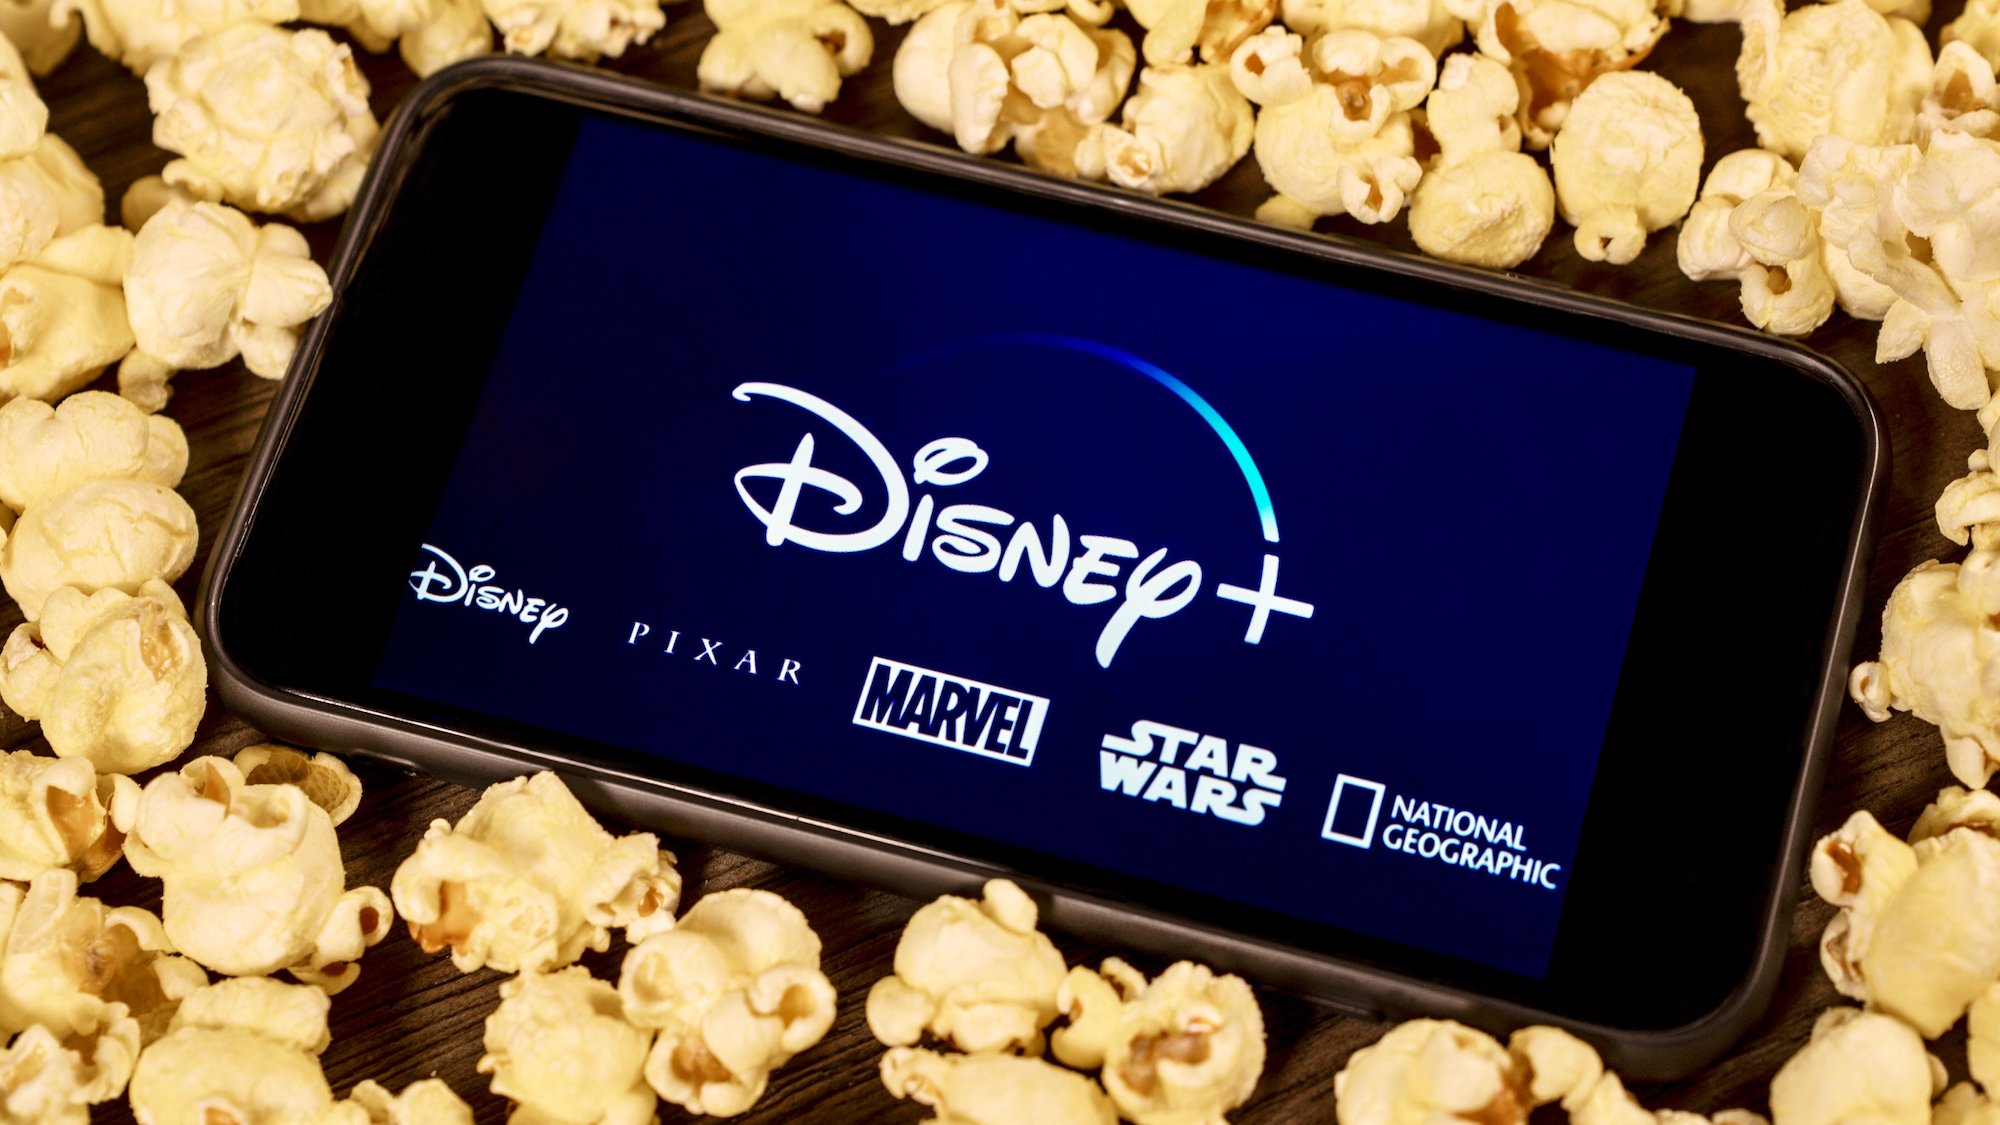 The Disney Plus logo on a phone surrounded by popcorn